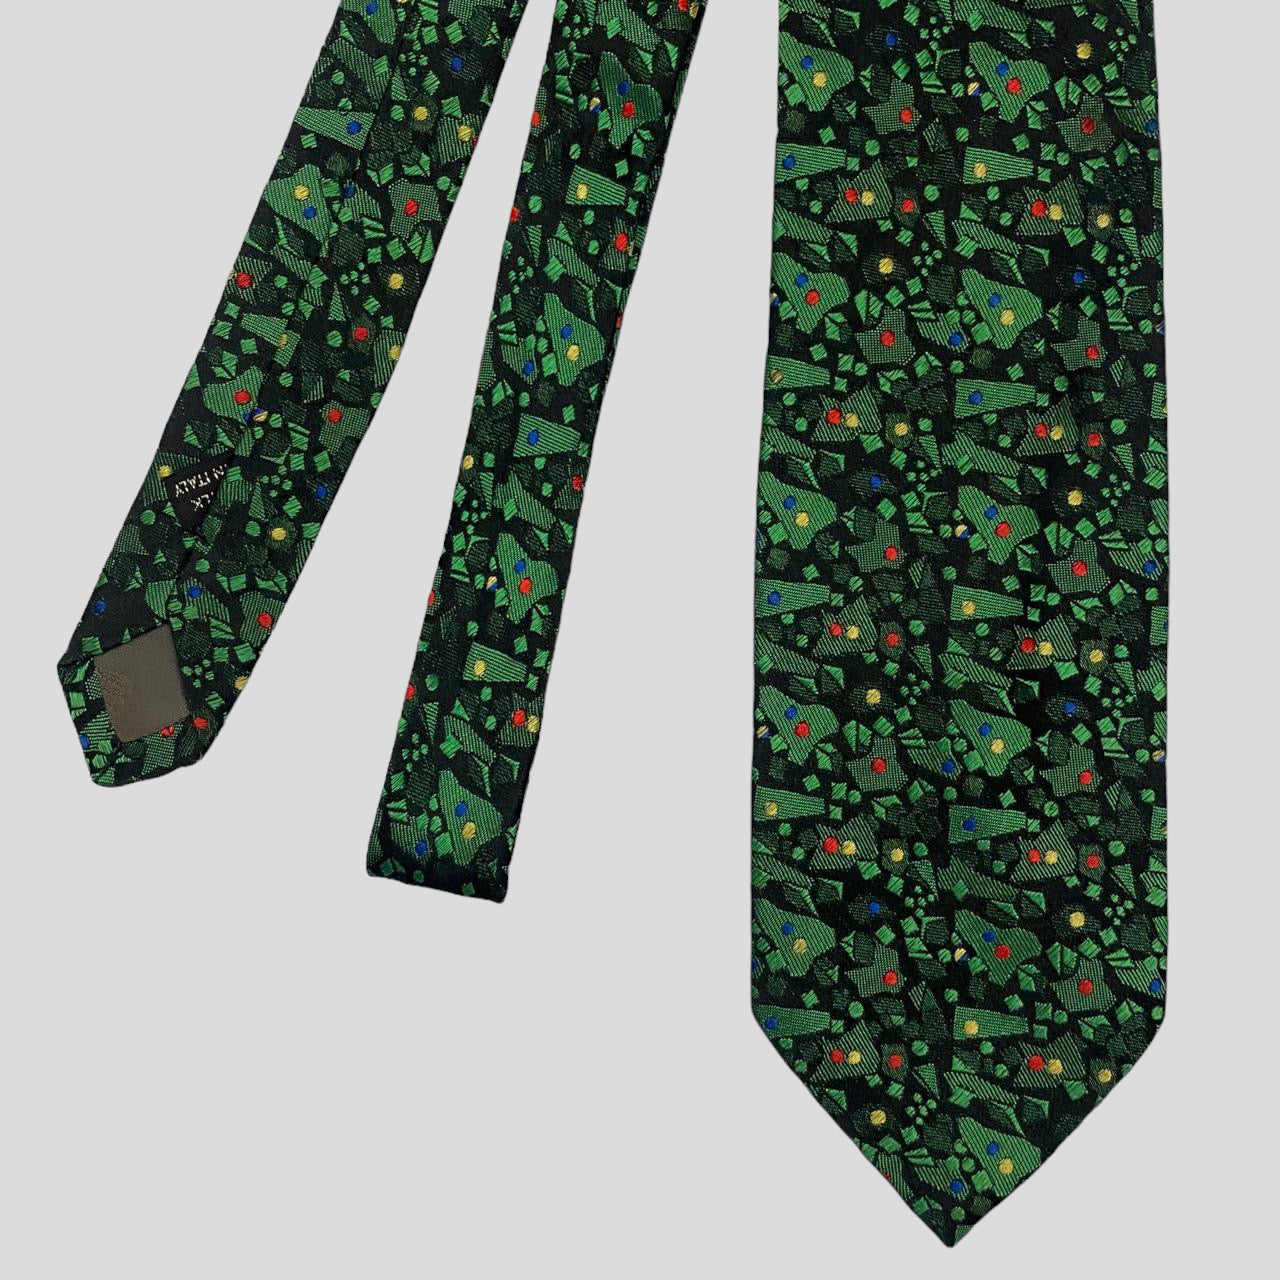 Moschino 80’s Abstract Silk Tie